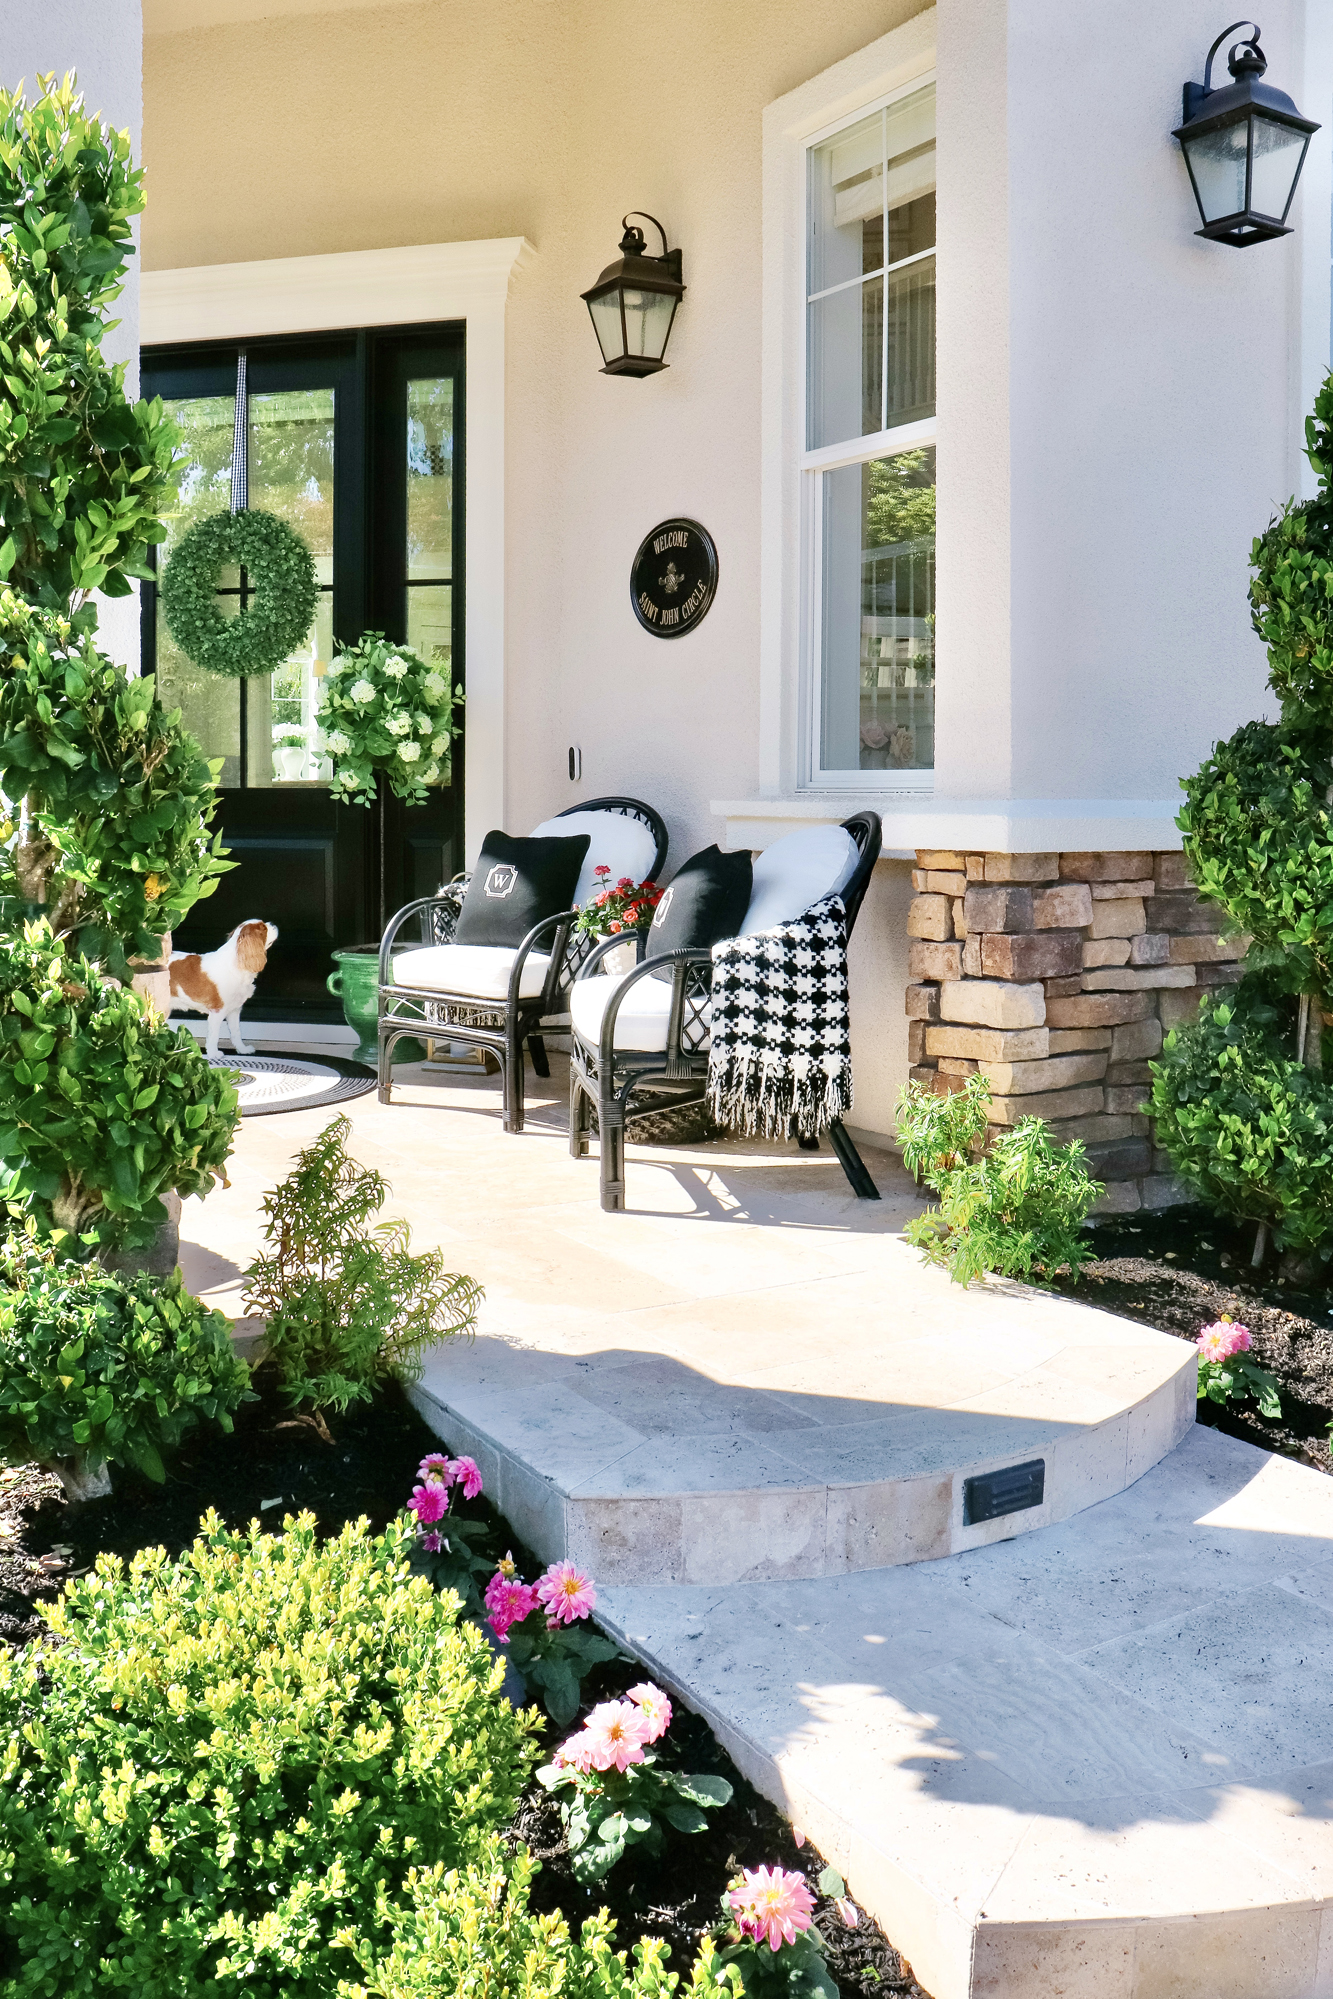 10 Easy & Beautiful Spring Porch Ideas - Lots of decor ideas and easy options to update and add curb appeal to your home. Many links and sources!